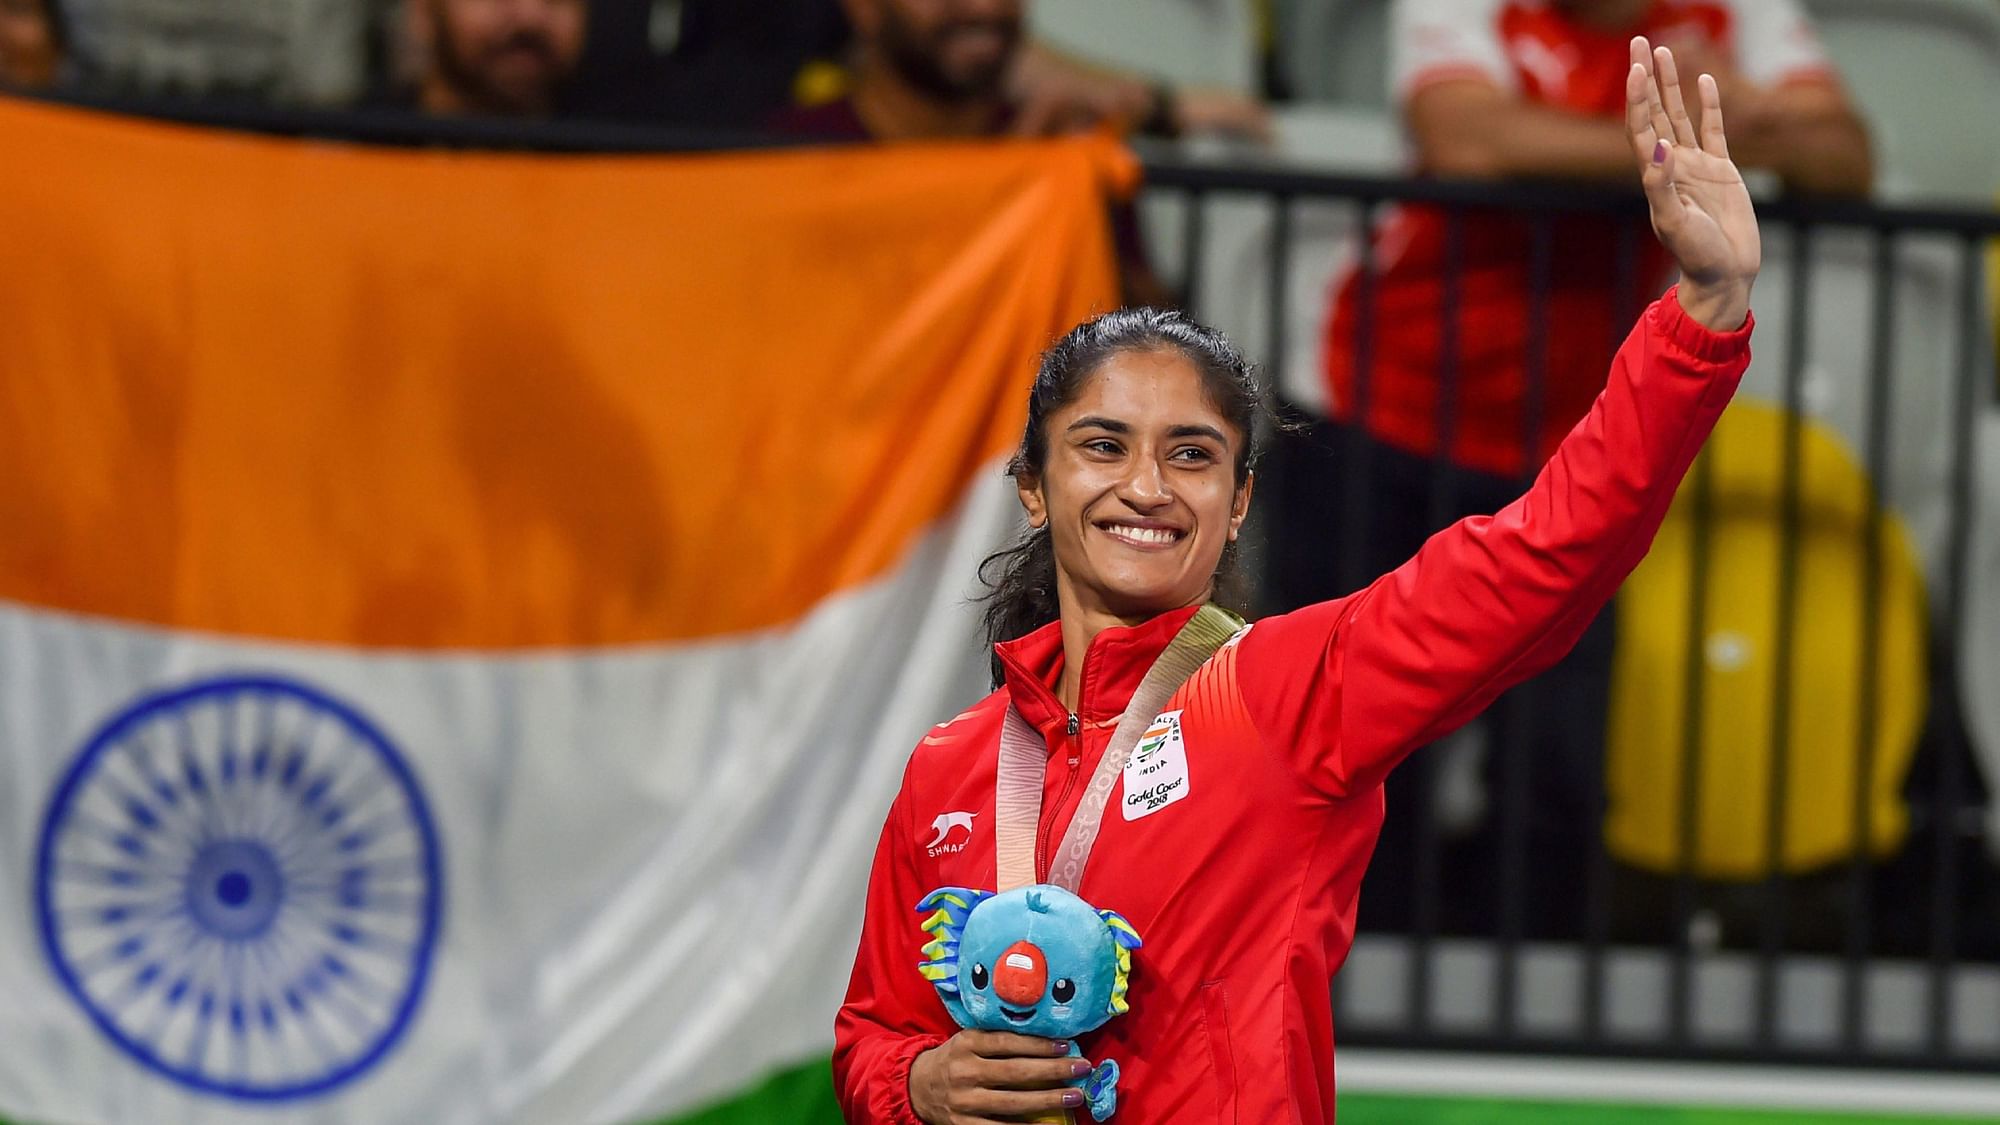 Vinesh Phogat won a gold medal at the 2018 Commonwealth Games.